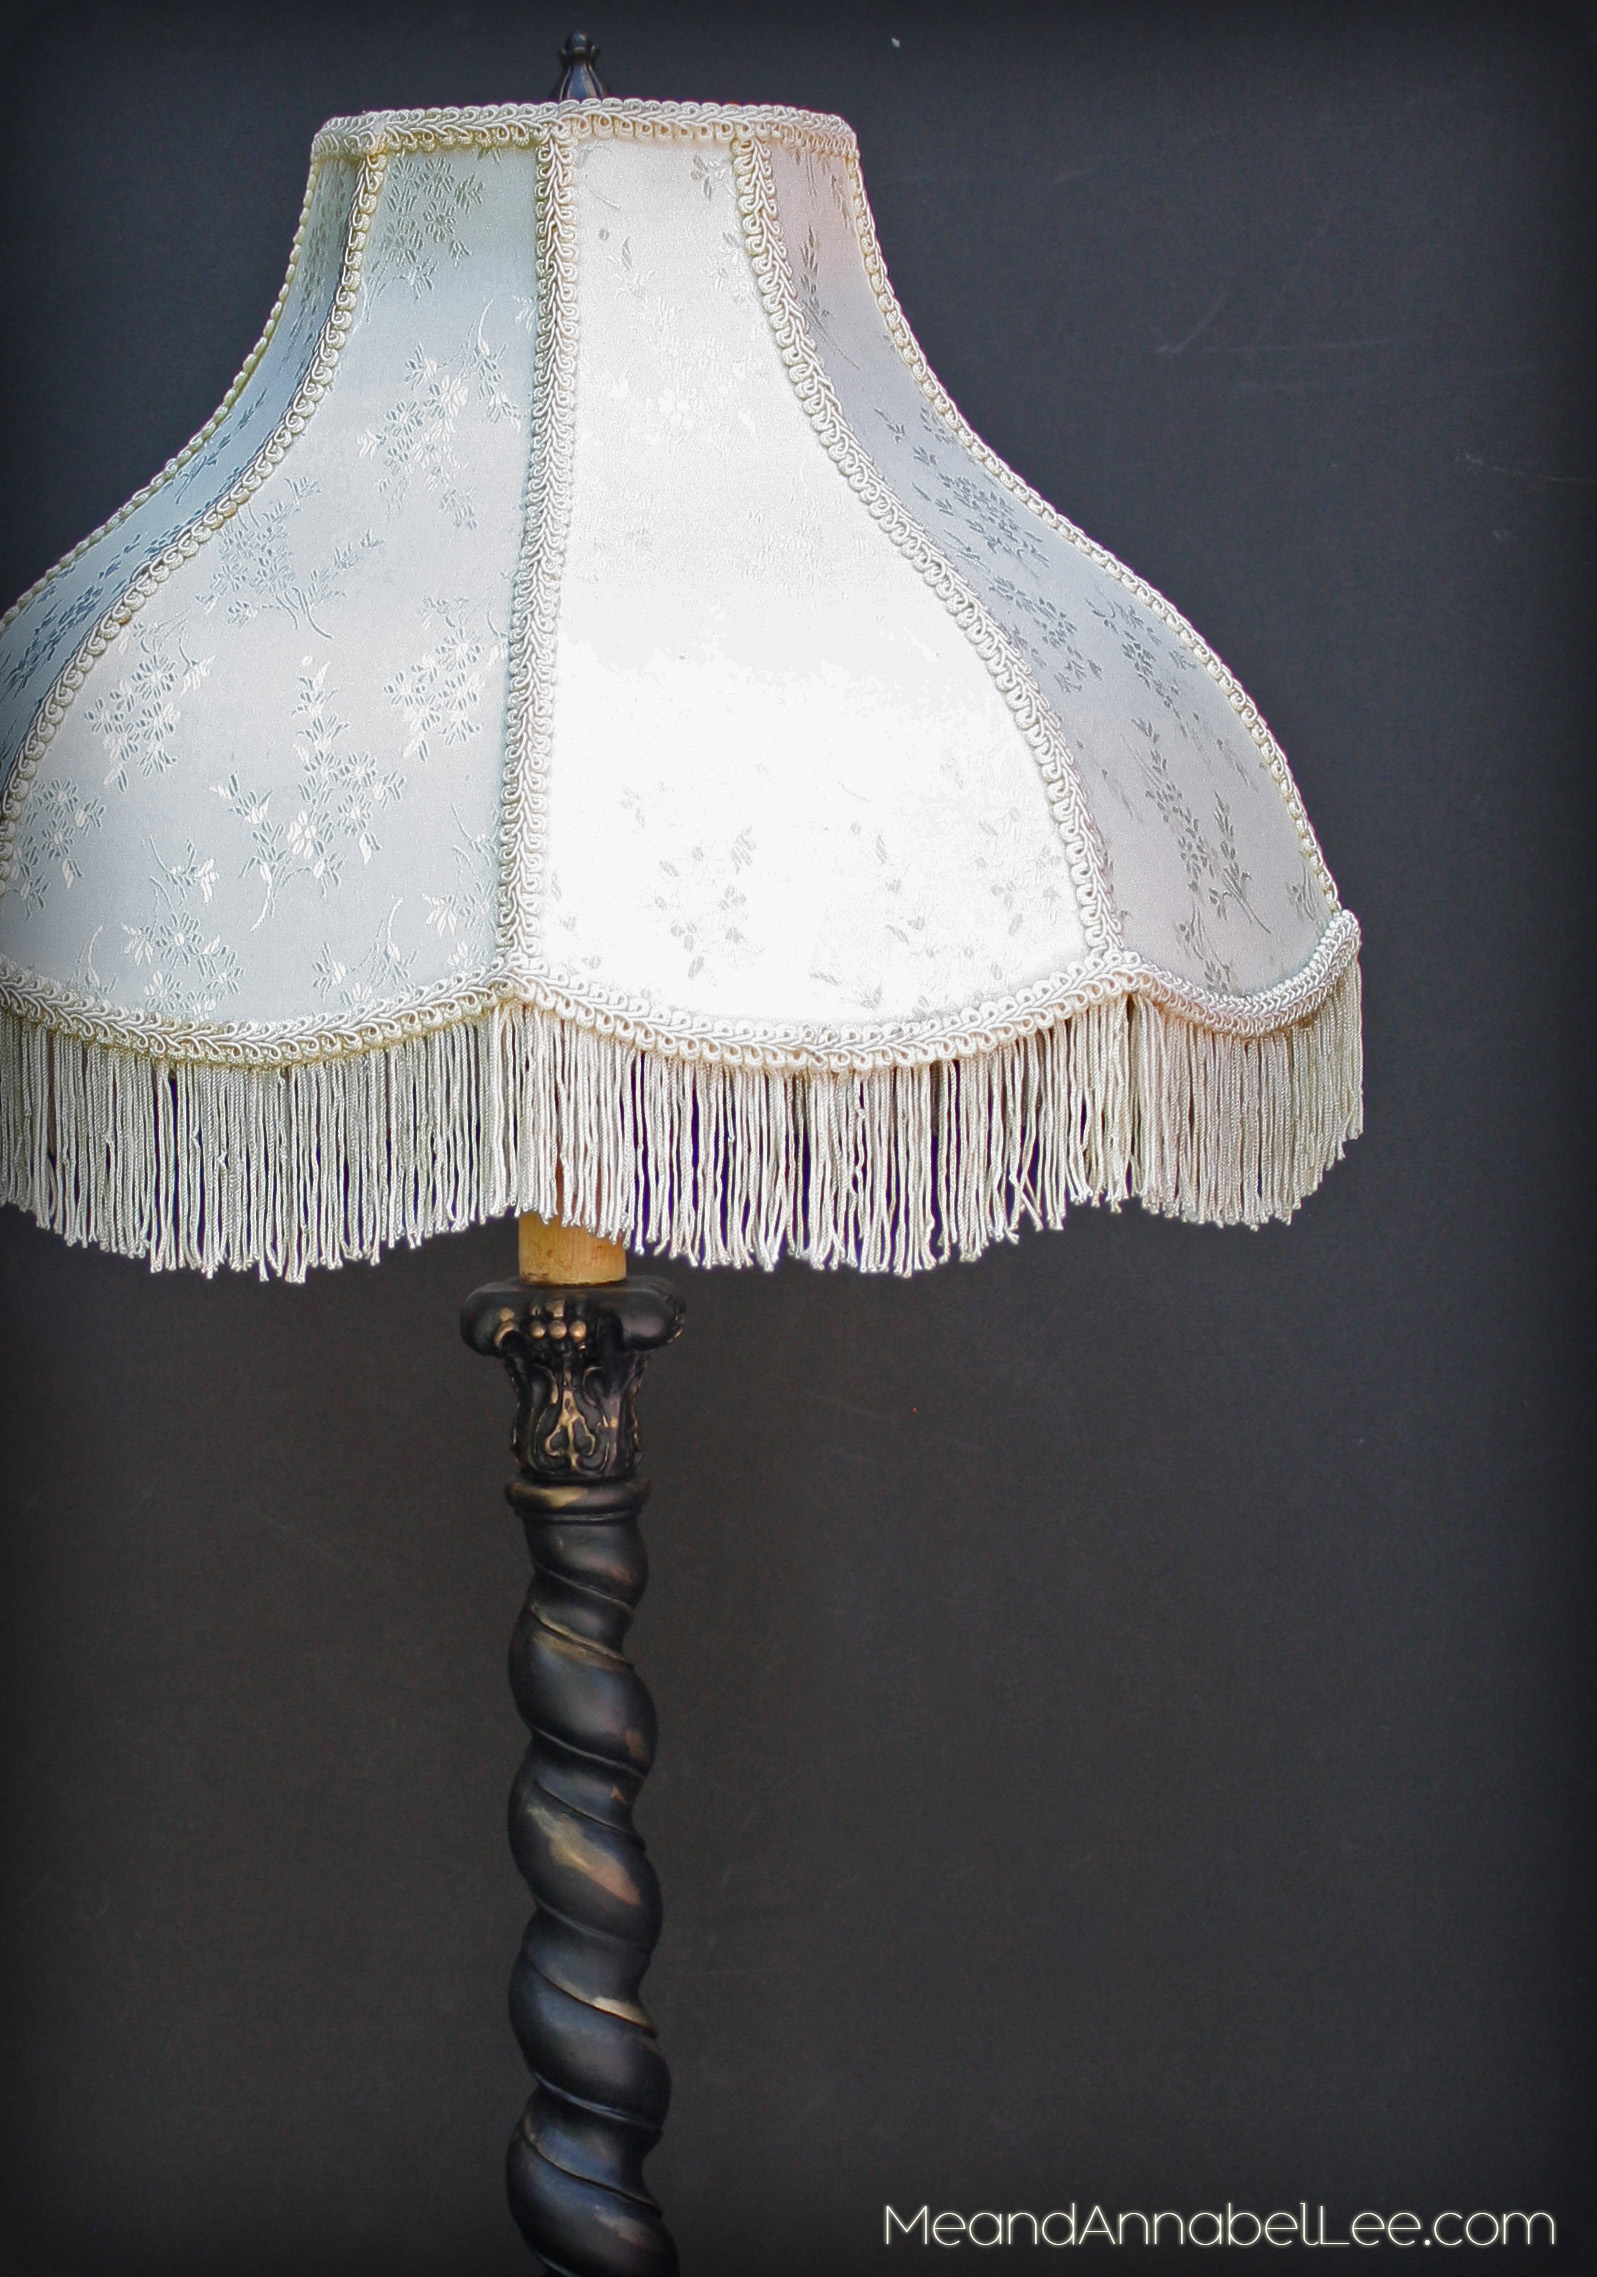 Refinishing a thrifted lamp with an antique finish using European Gold Rub n Buff - Painting Technique - Goth It Yourself - Gothic Home - Victorian DIY - Paint it Black - www.MeandAnnabelLee.com - Blog for all things Dark, Gothic, Victorian, & Unusual